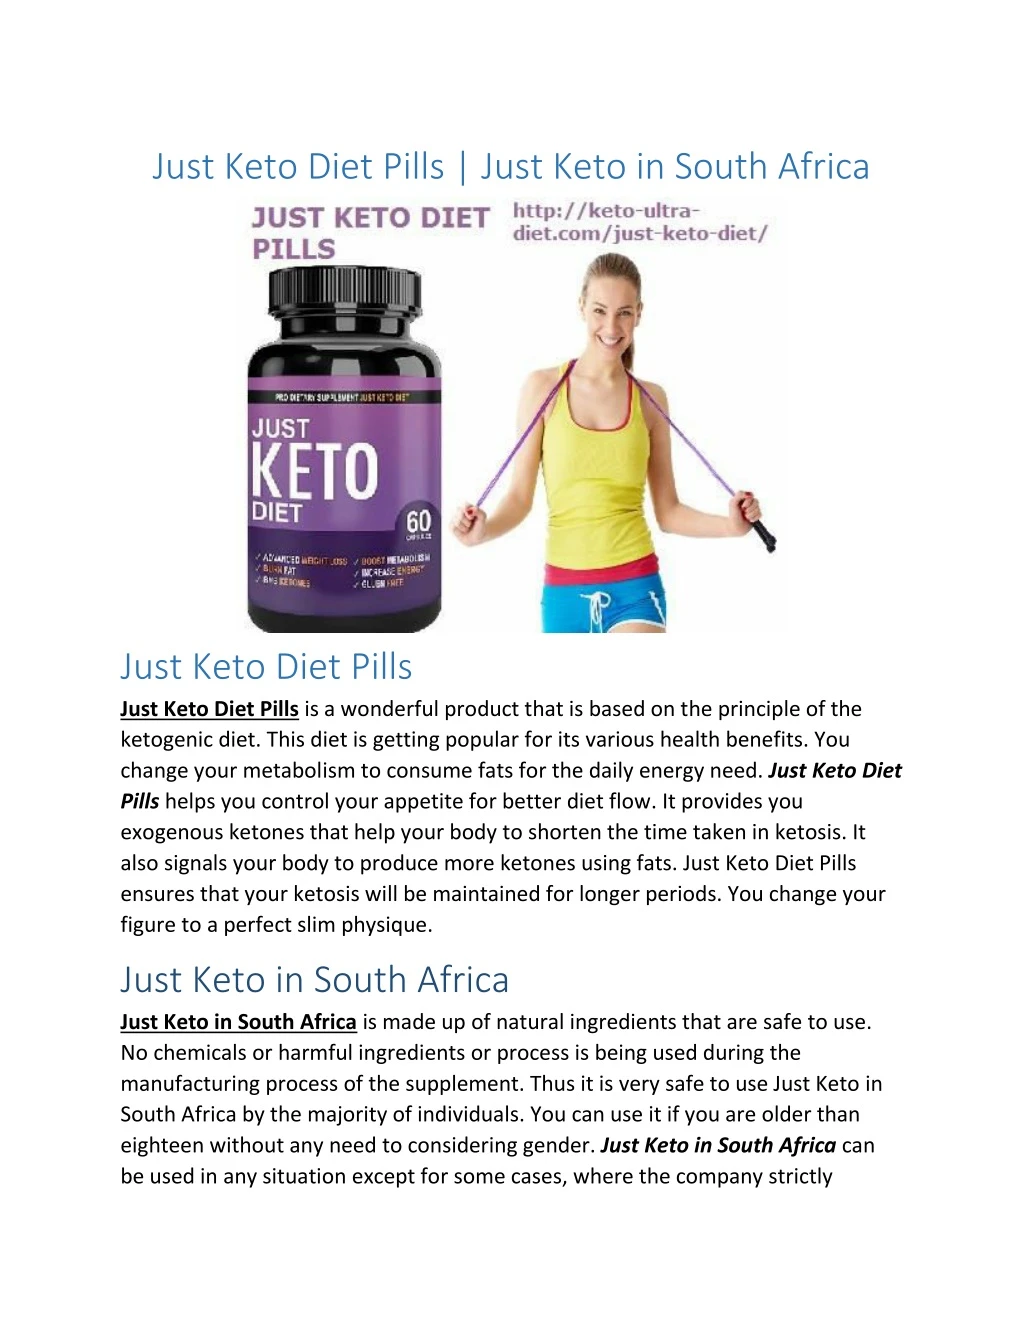 just keto diet pills just keto in south africa